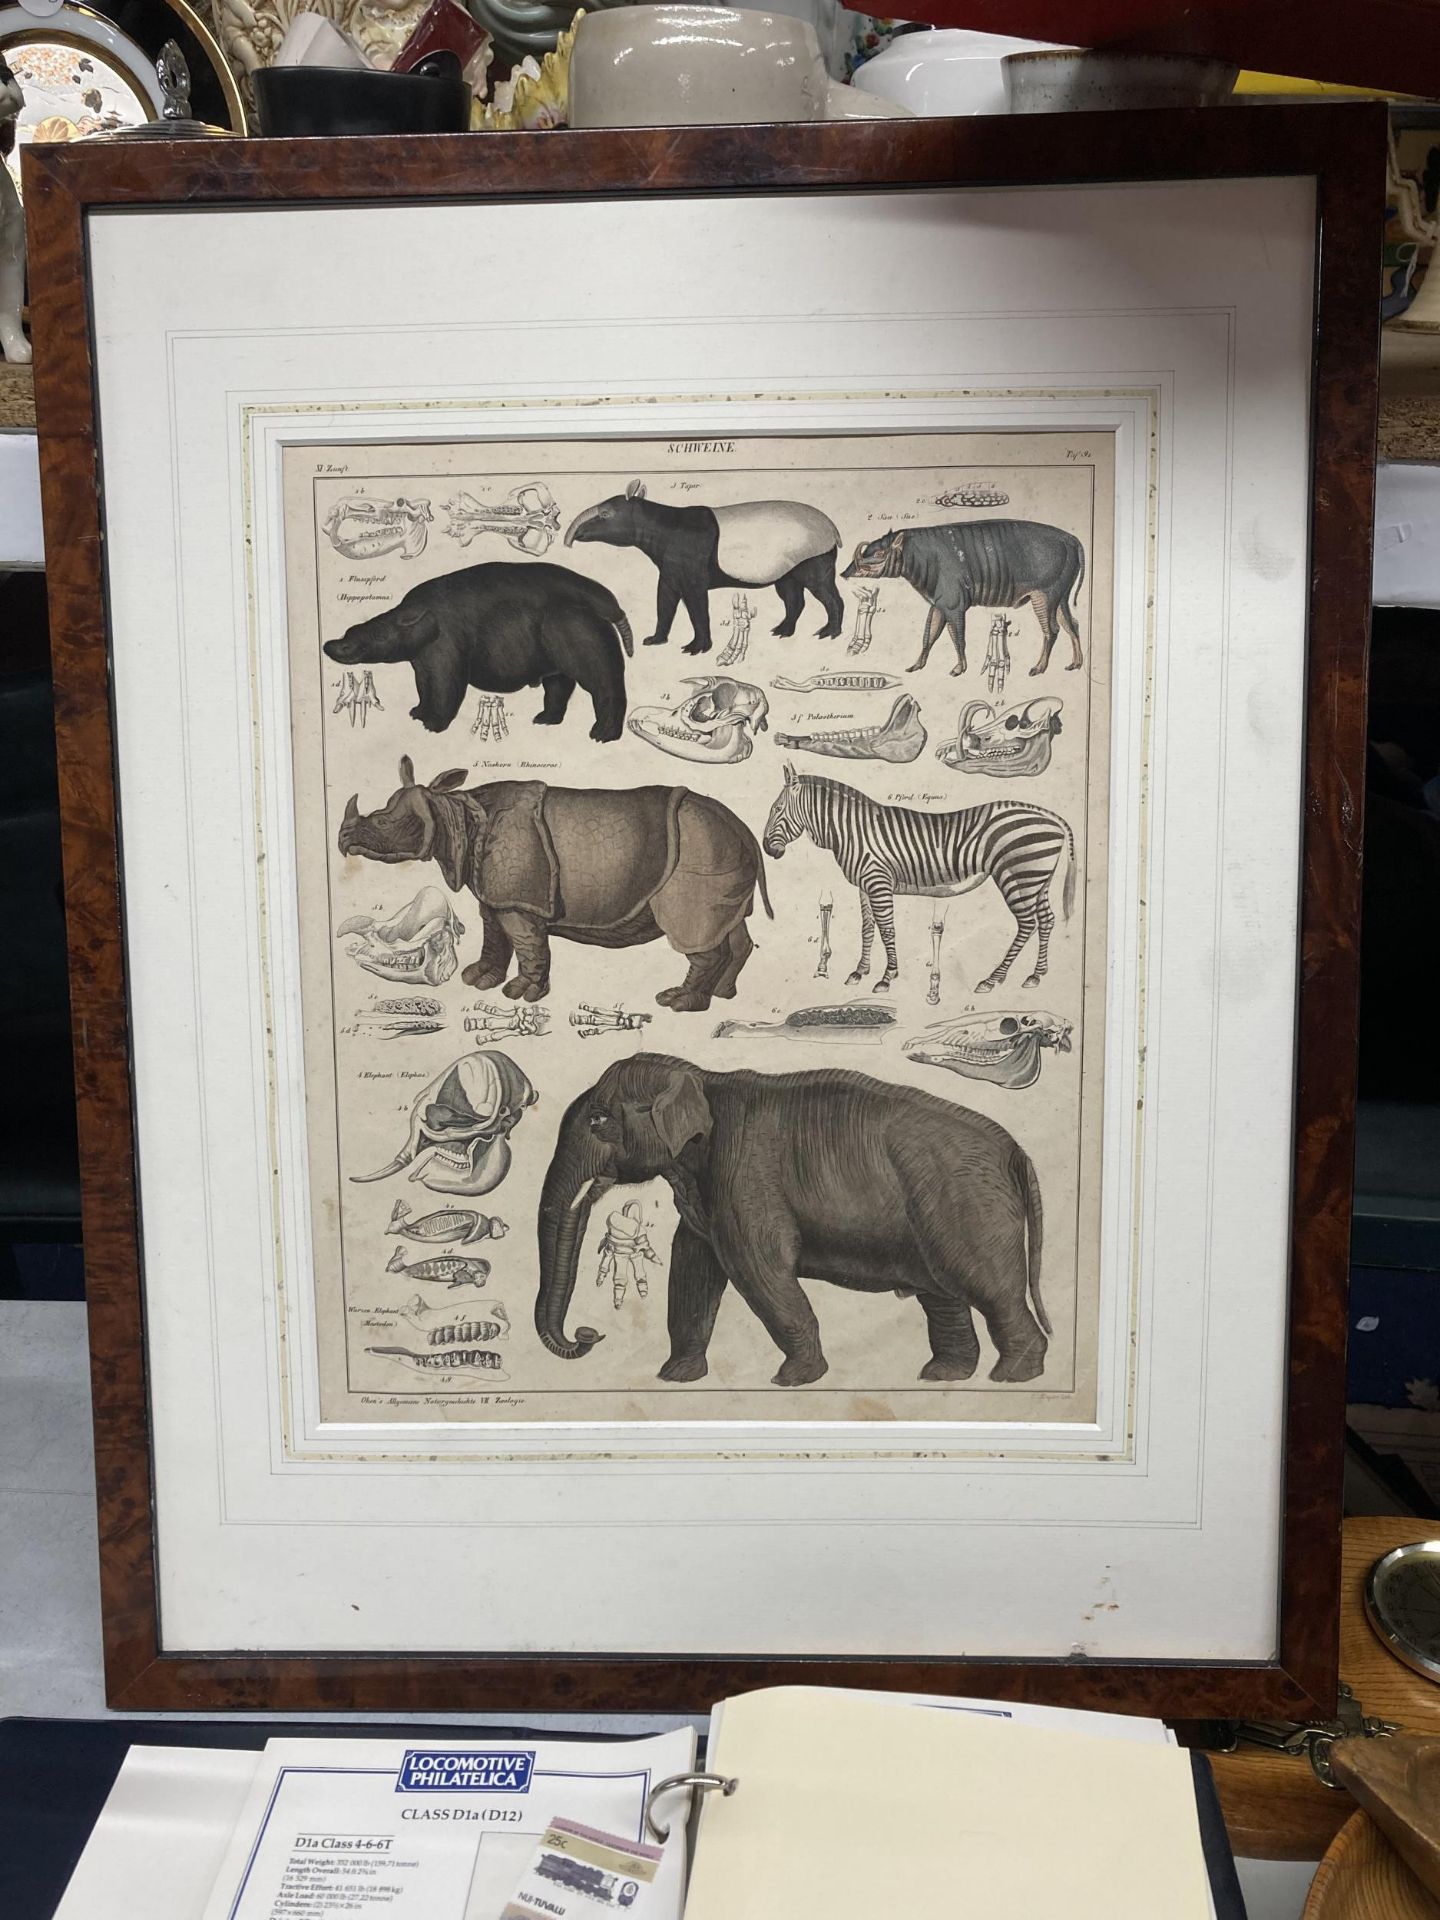 A FRAMED ANTIQUE PRINT OF A TAPIR, HIPPO, ZEBRA, ELEPHANT AND OTHER ANIMALS